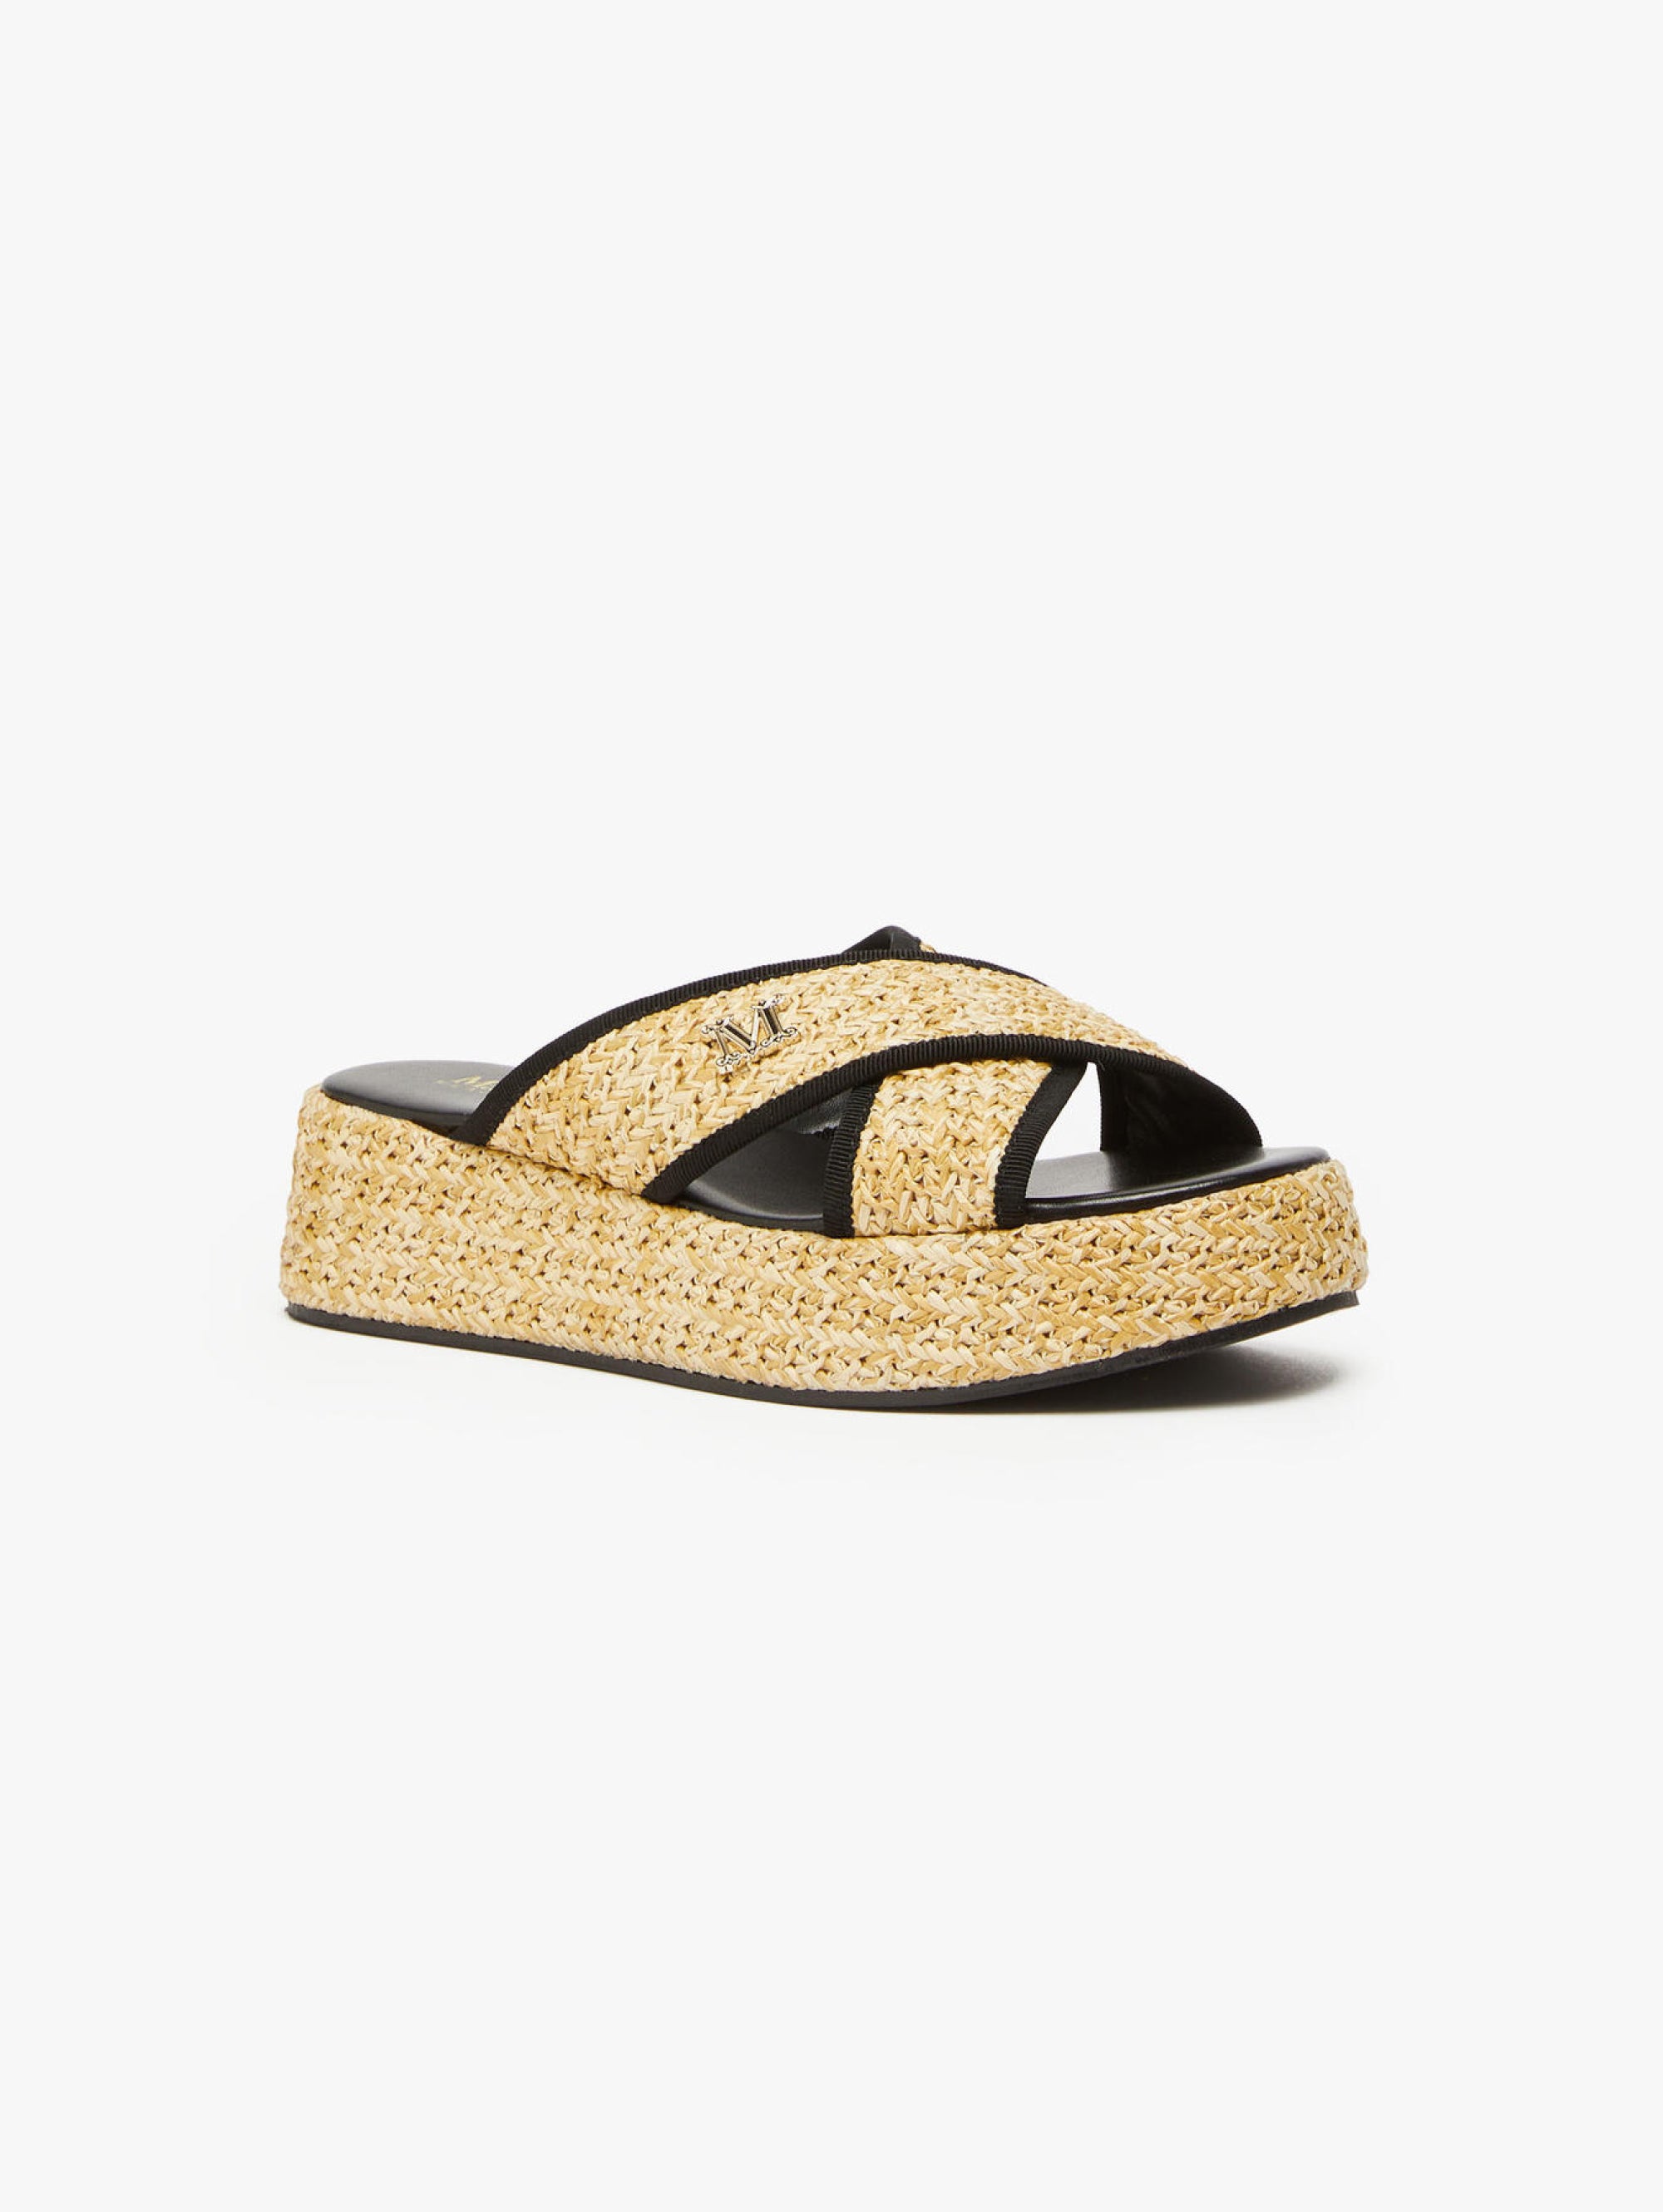 Sandals with Wedge and Cross Band in Beige Raffia